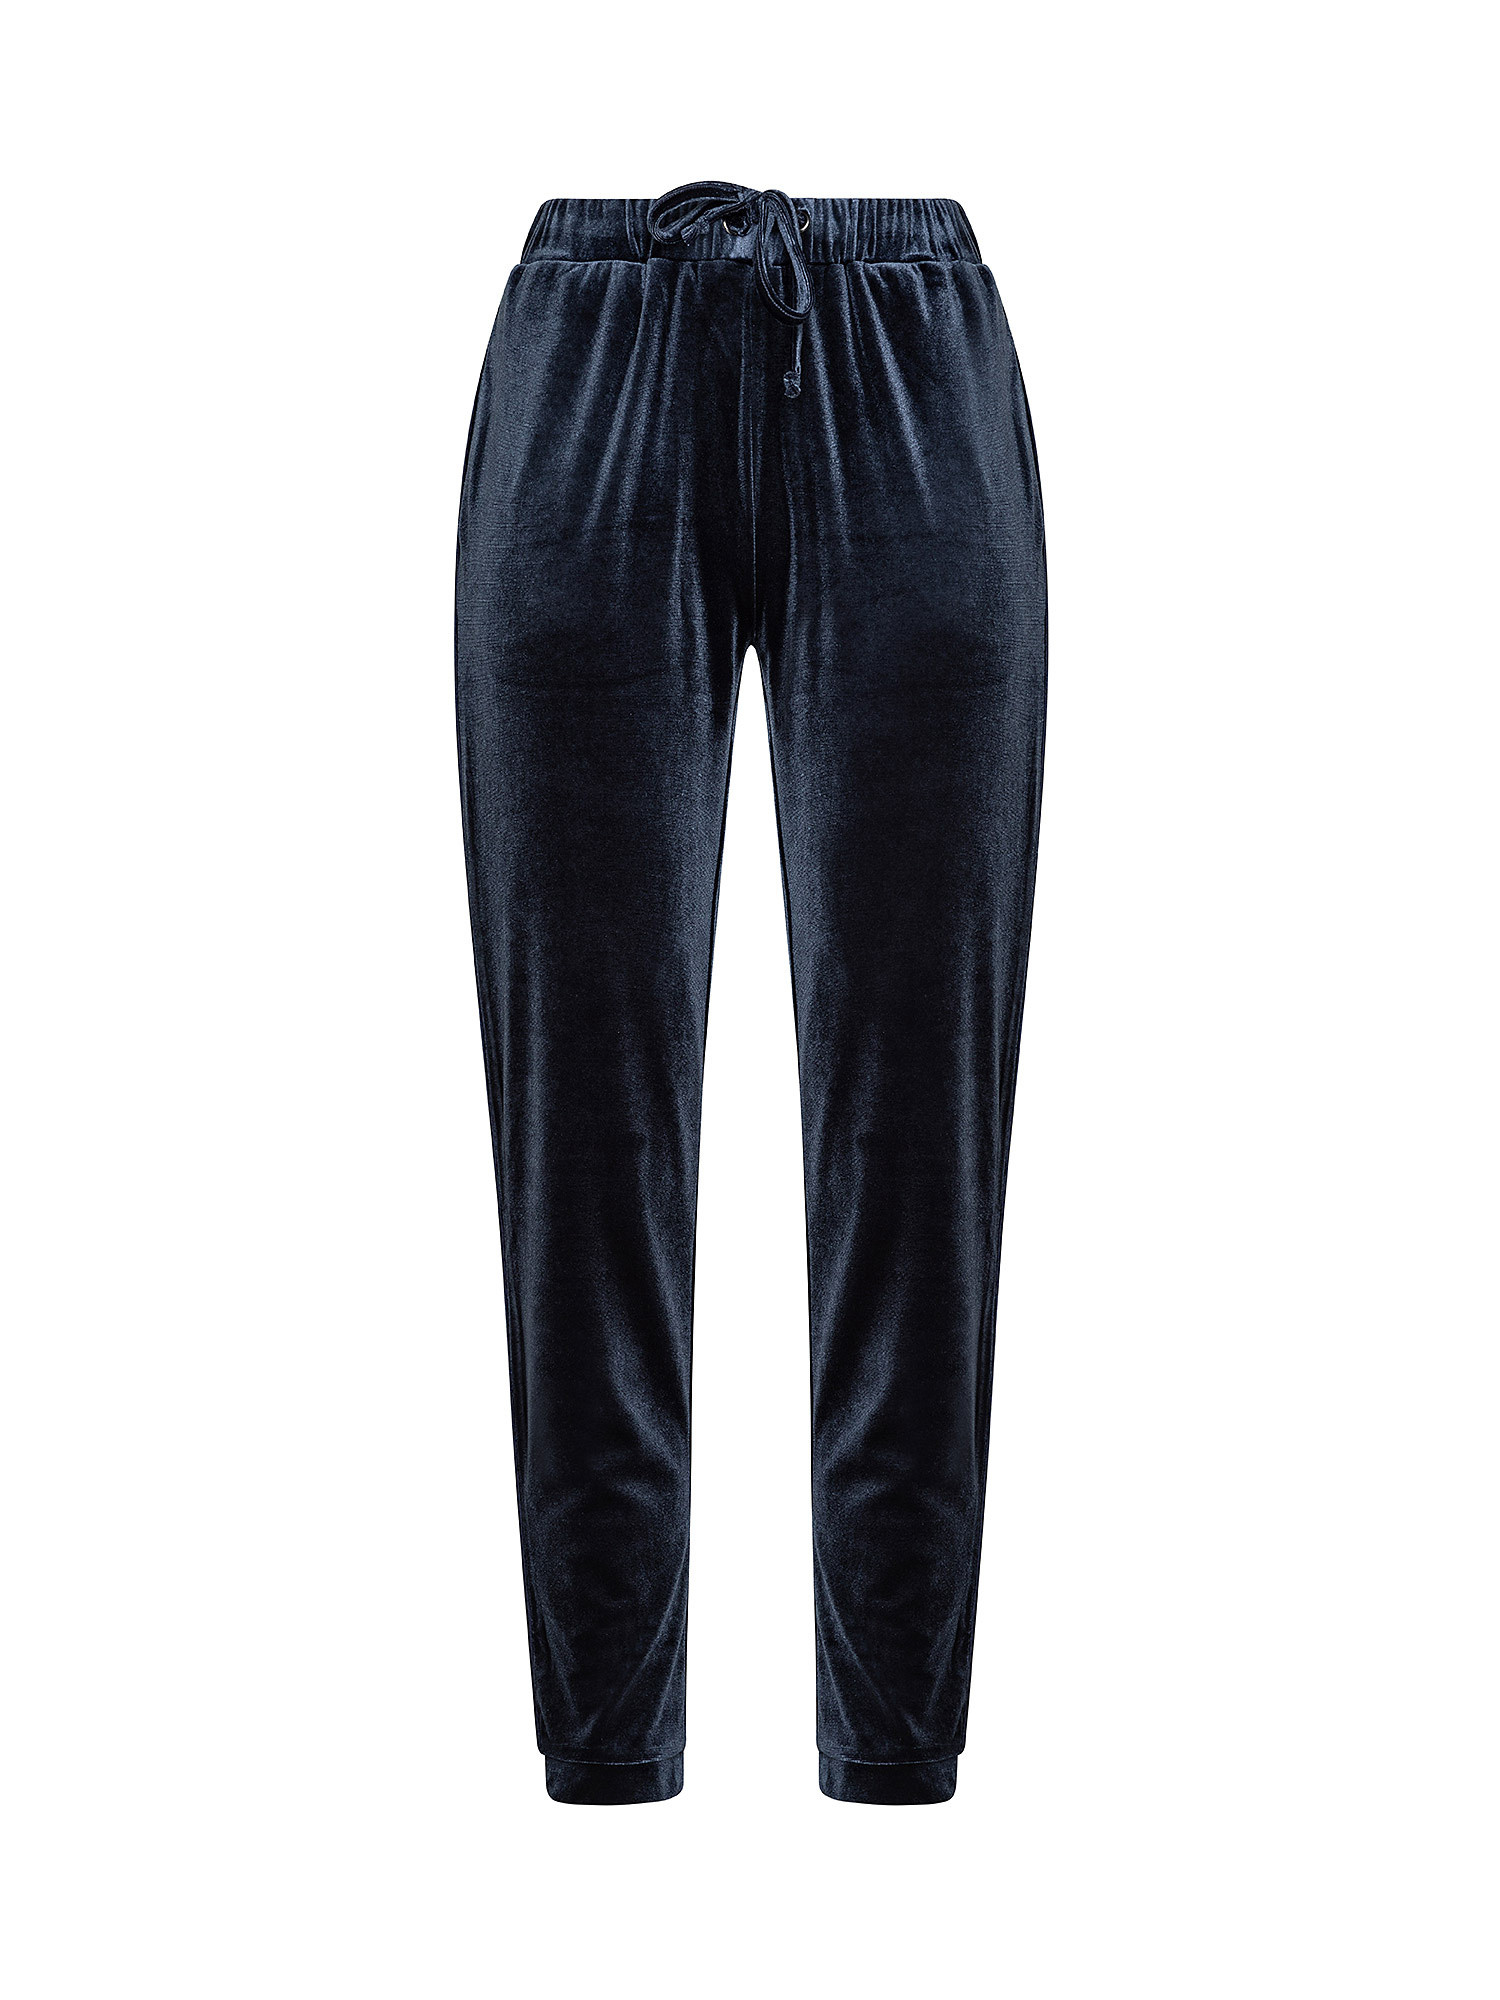 chenille trousers, Blue, large image number 0